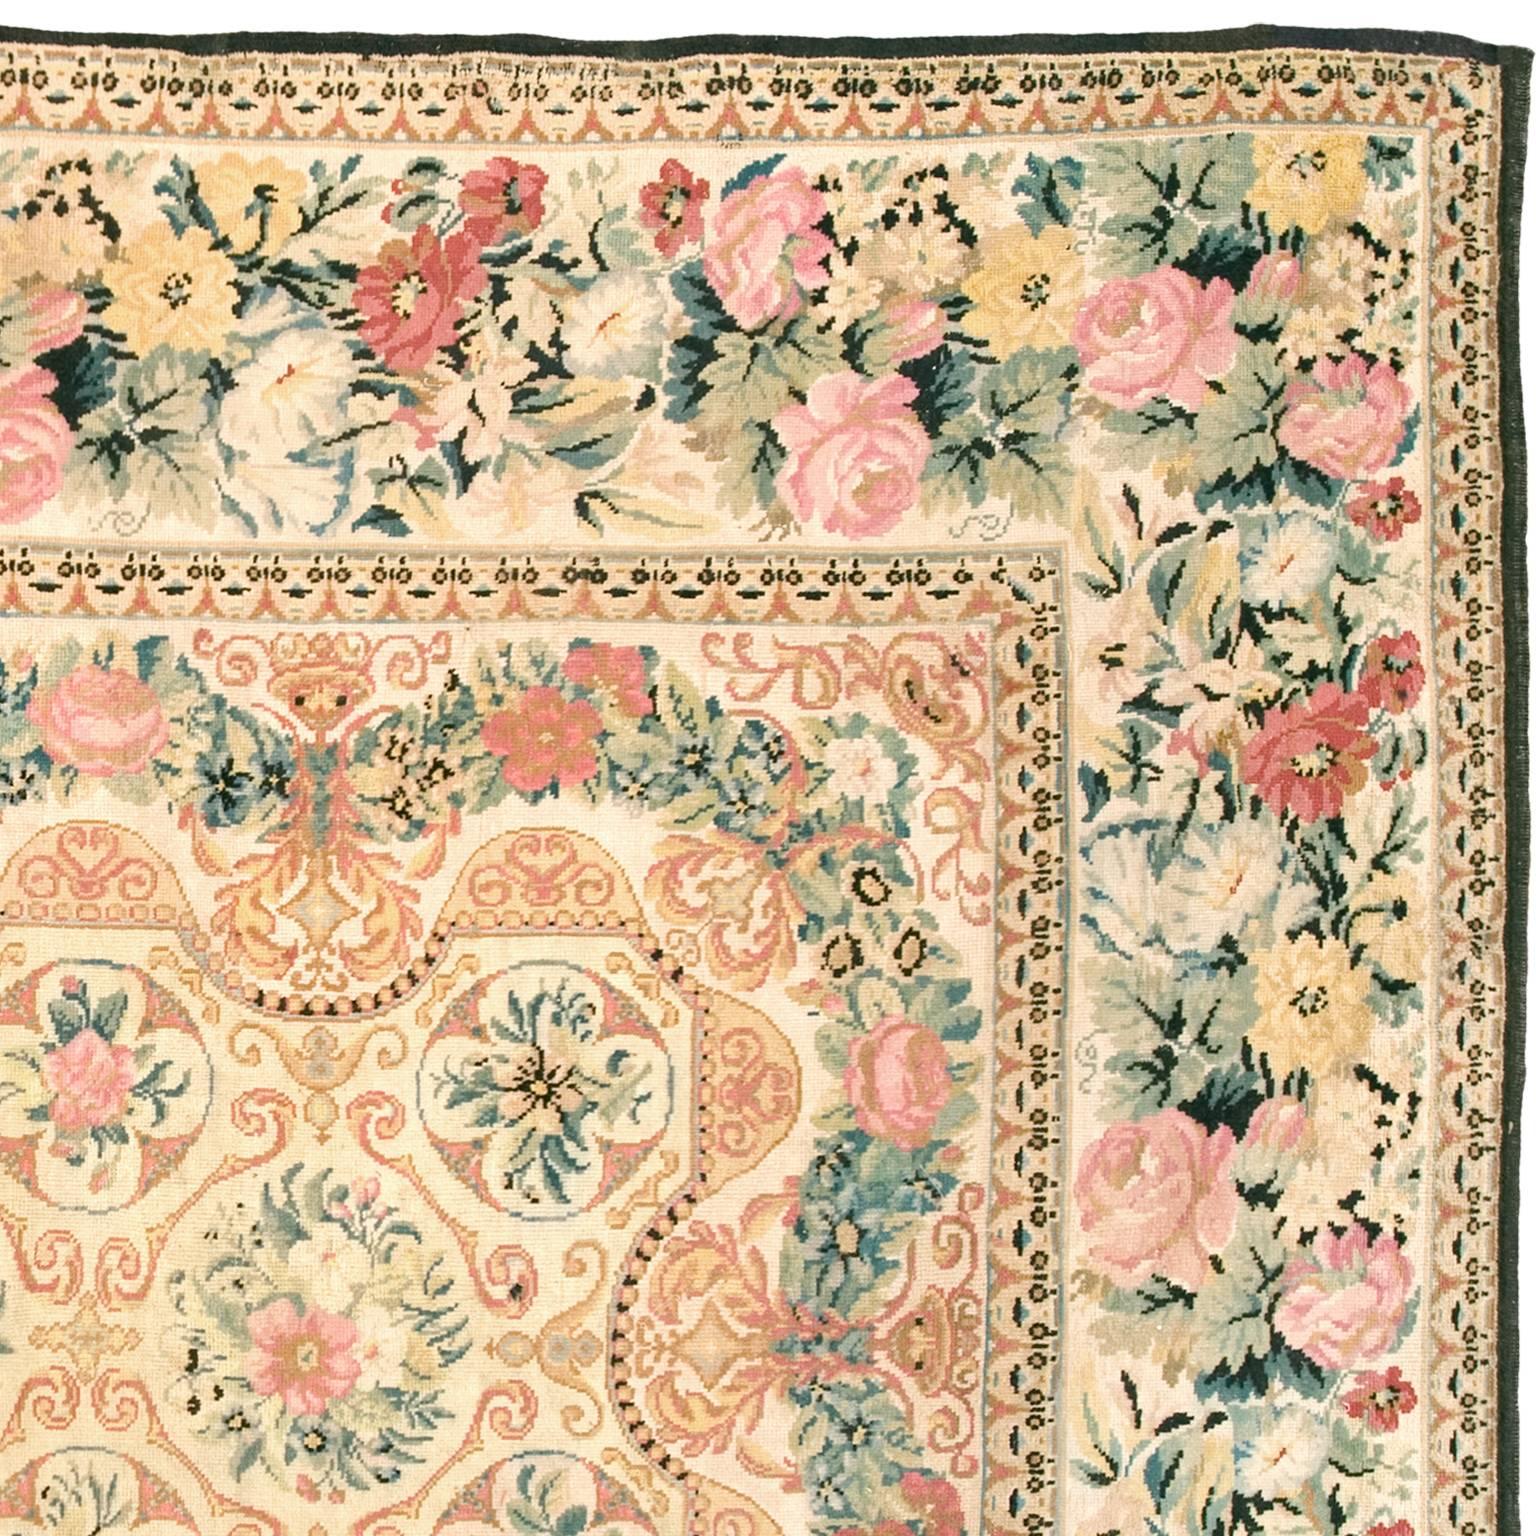 Hand-Woven Ukranian Pile Carpet with Floral Design, 19th Century For Sale